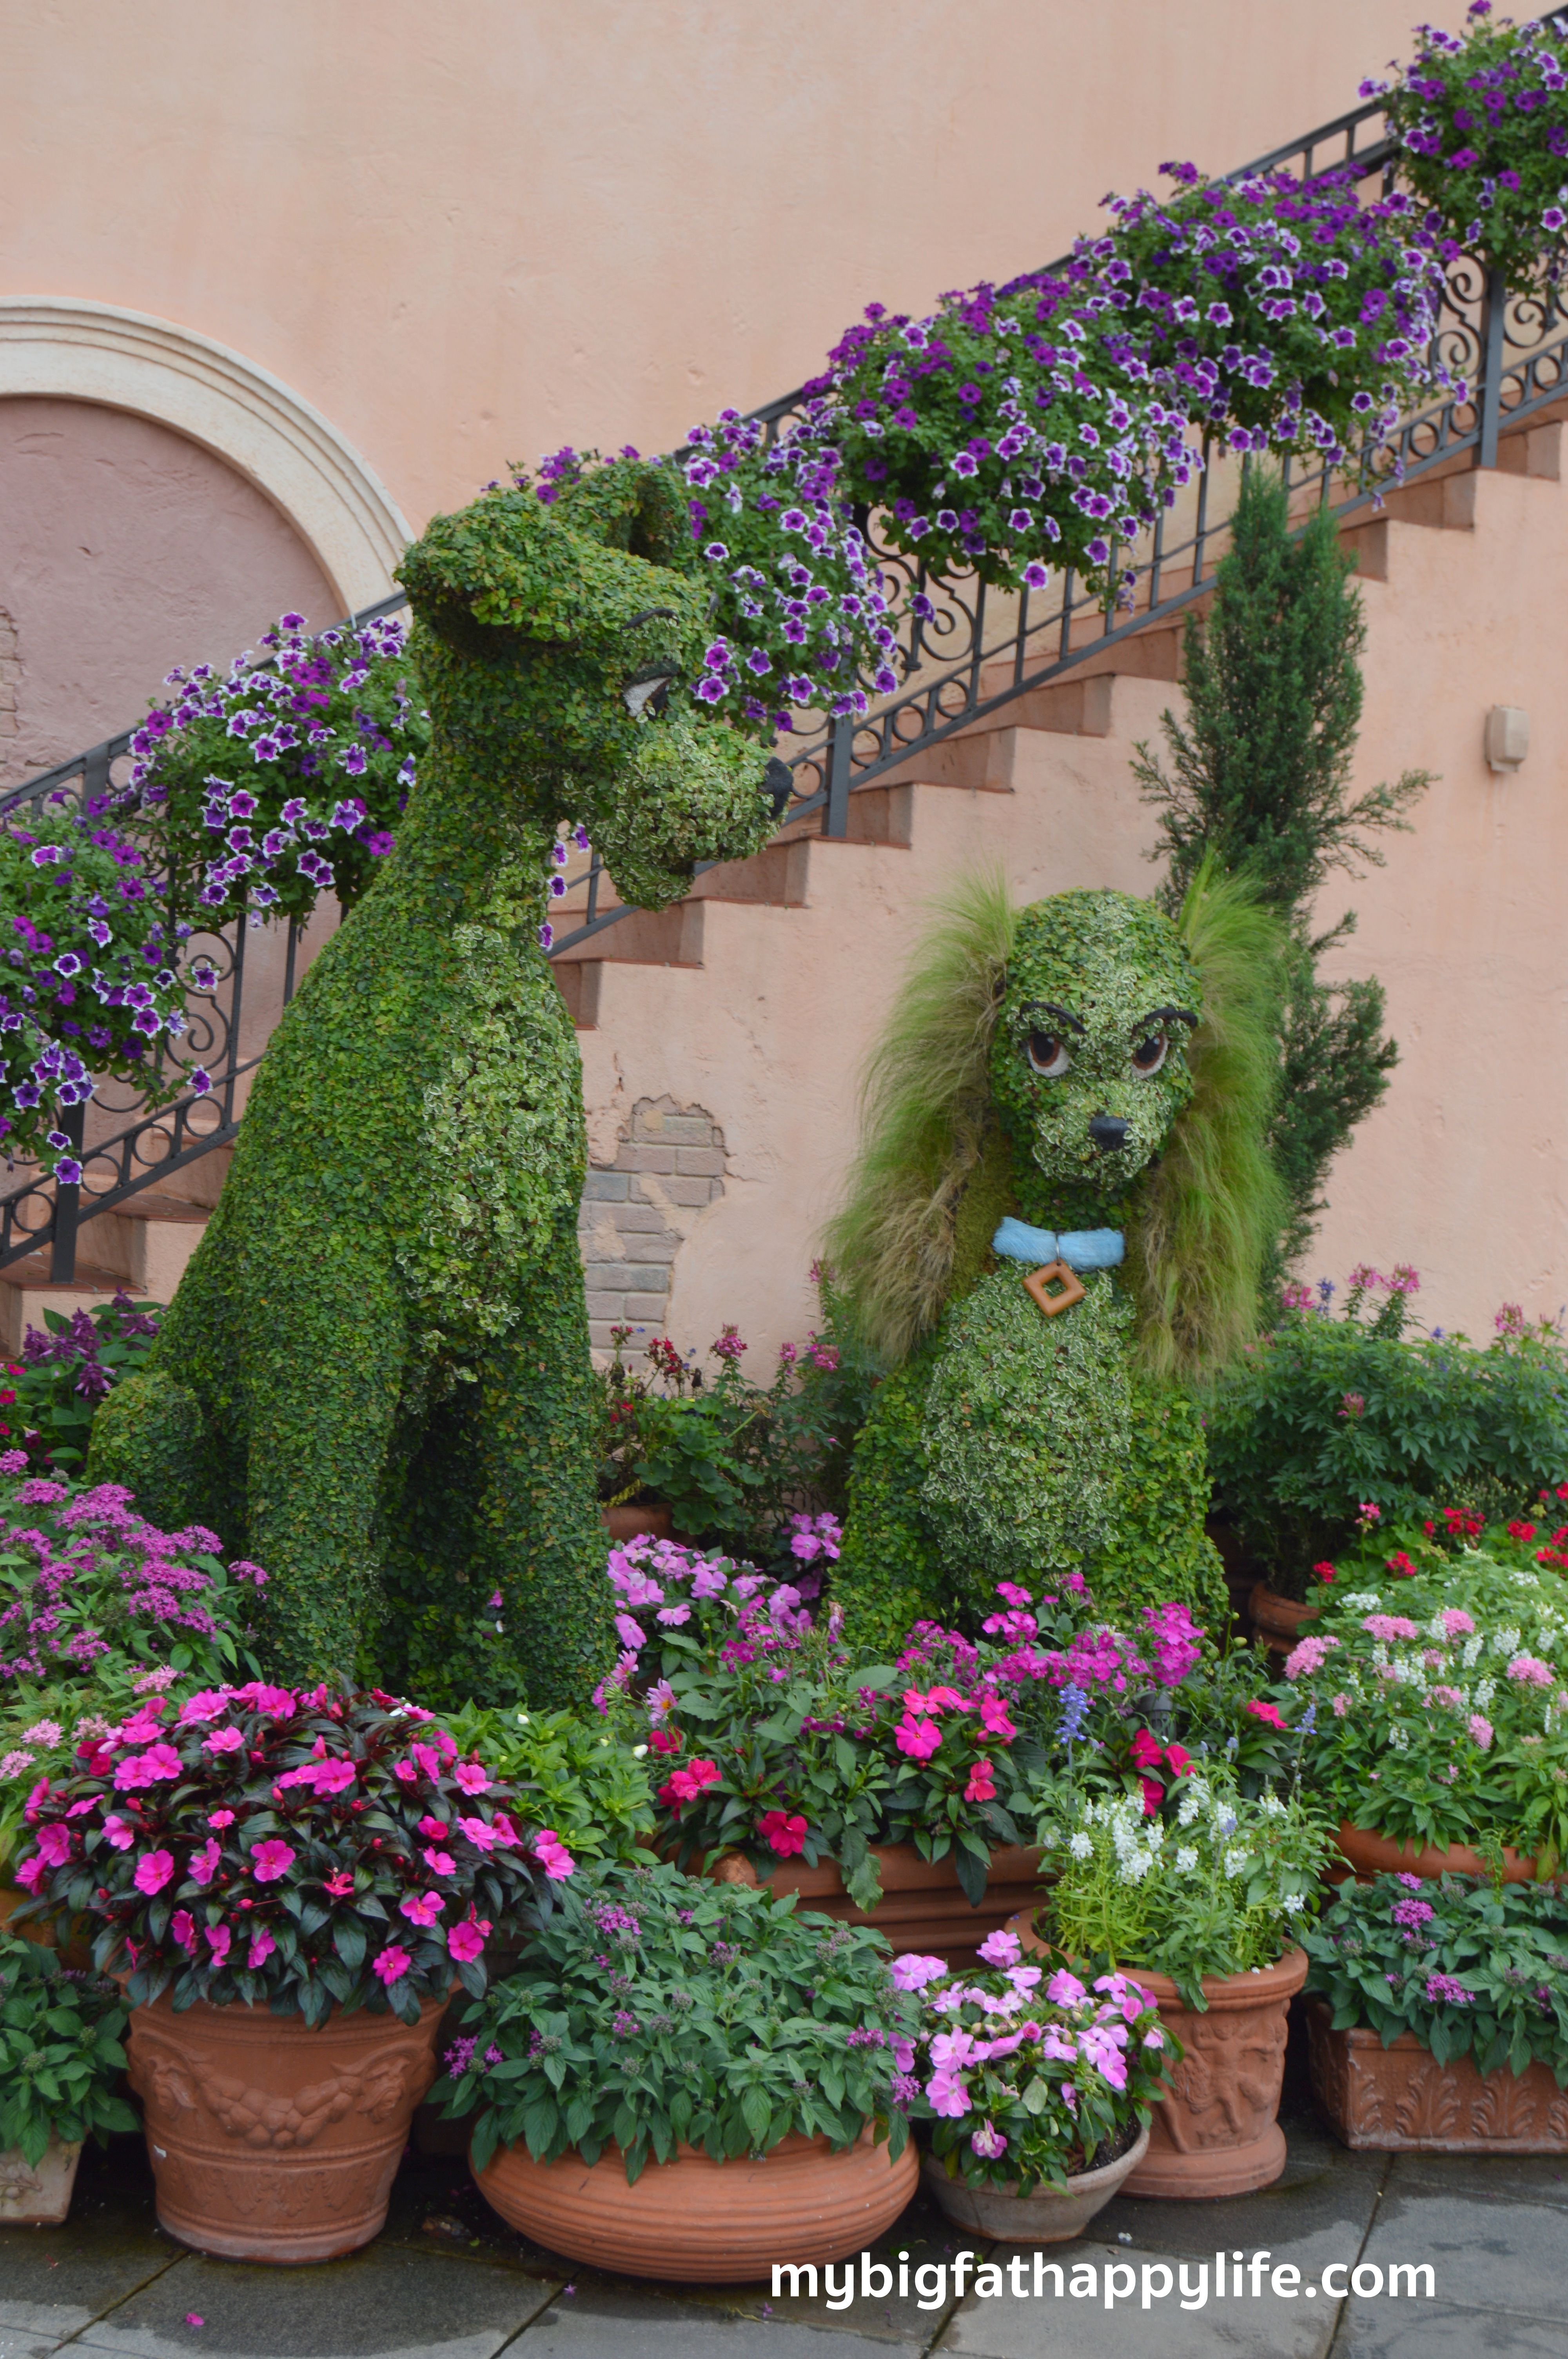 what is new at the epcot international flower and garden festival